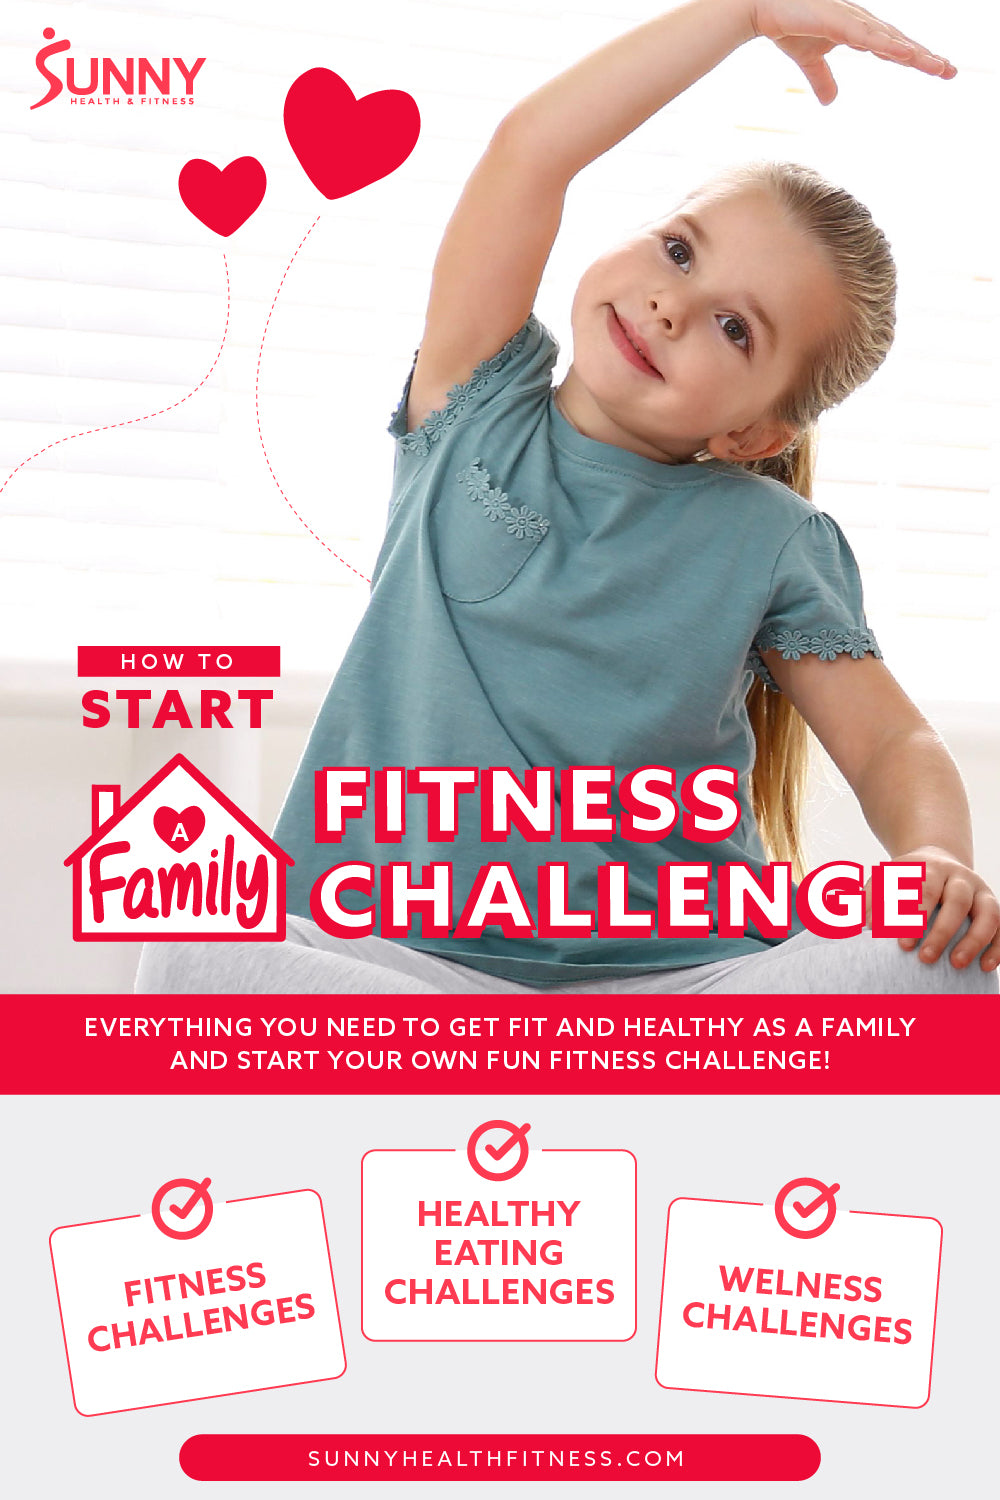 How to Start a Family Fitness Challenge